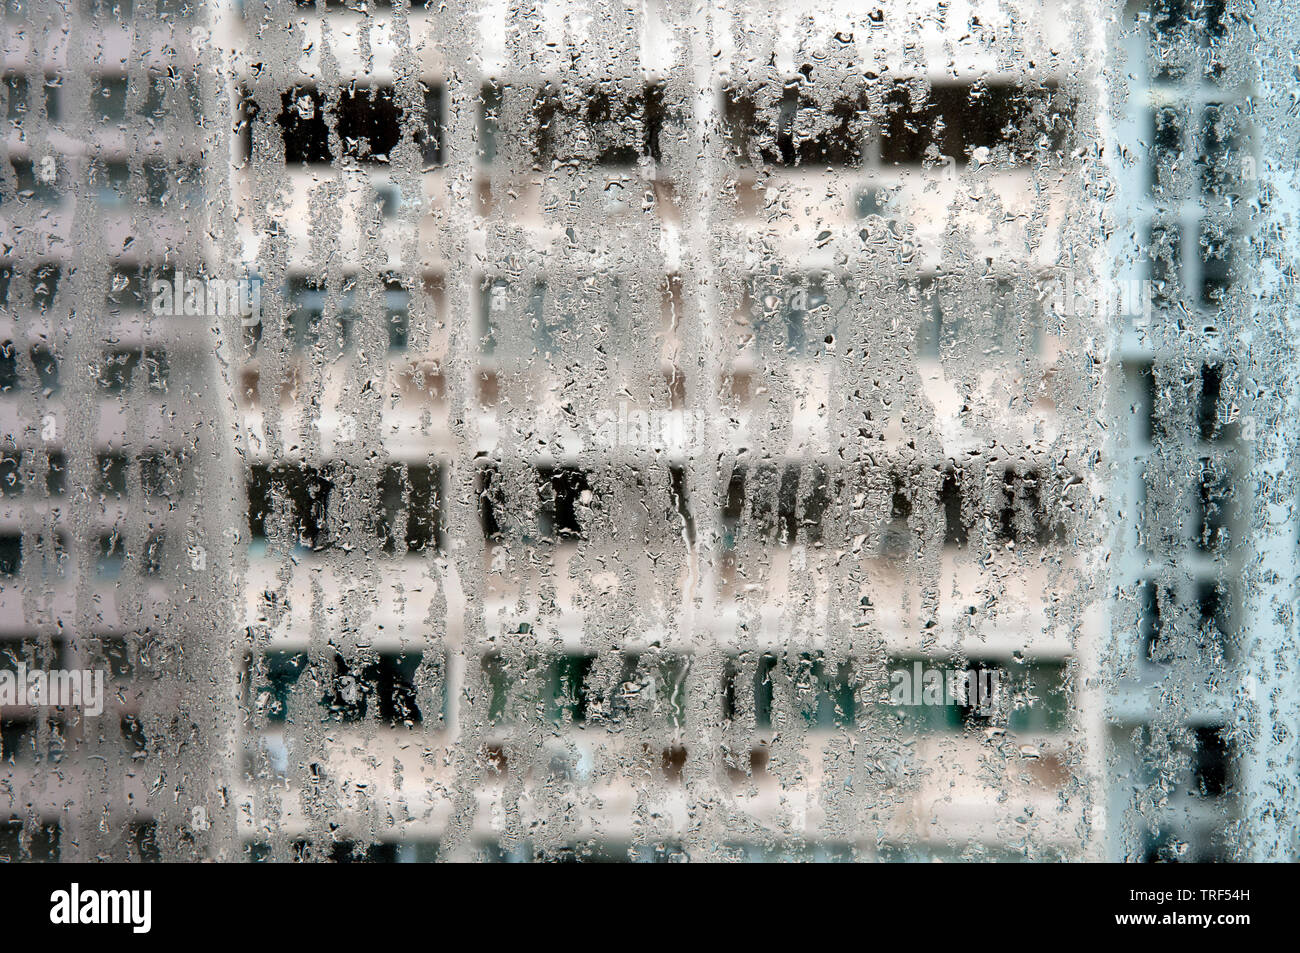 Hong Kong Tower Blocks Viewed Through A Window Running With Condensation Stock Photo